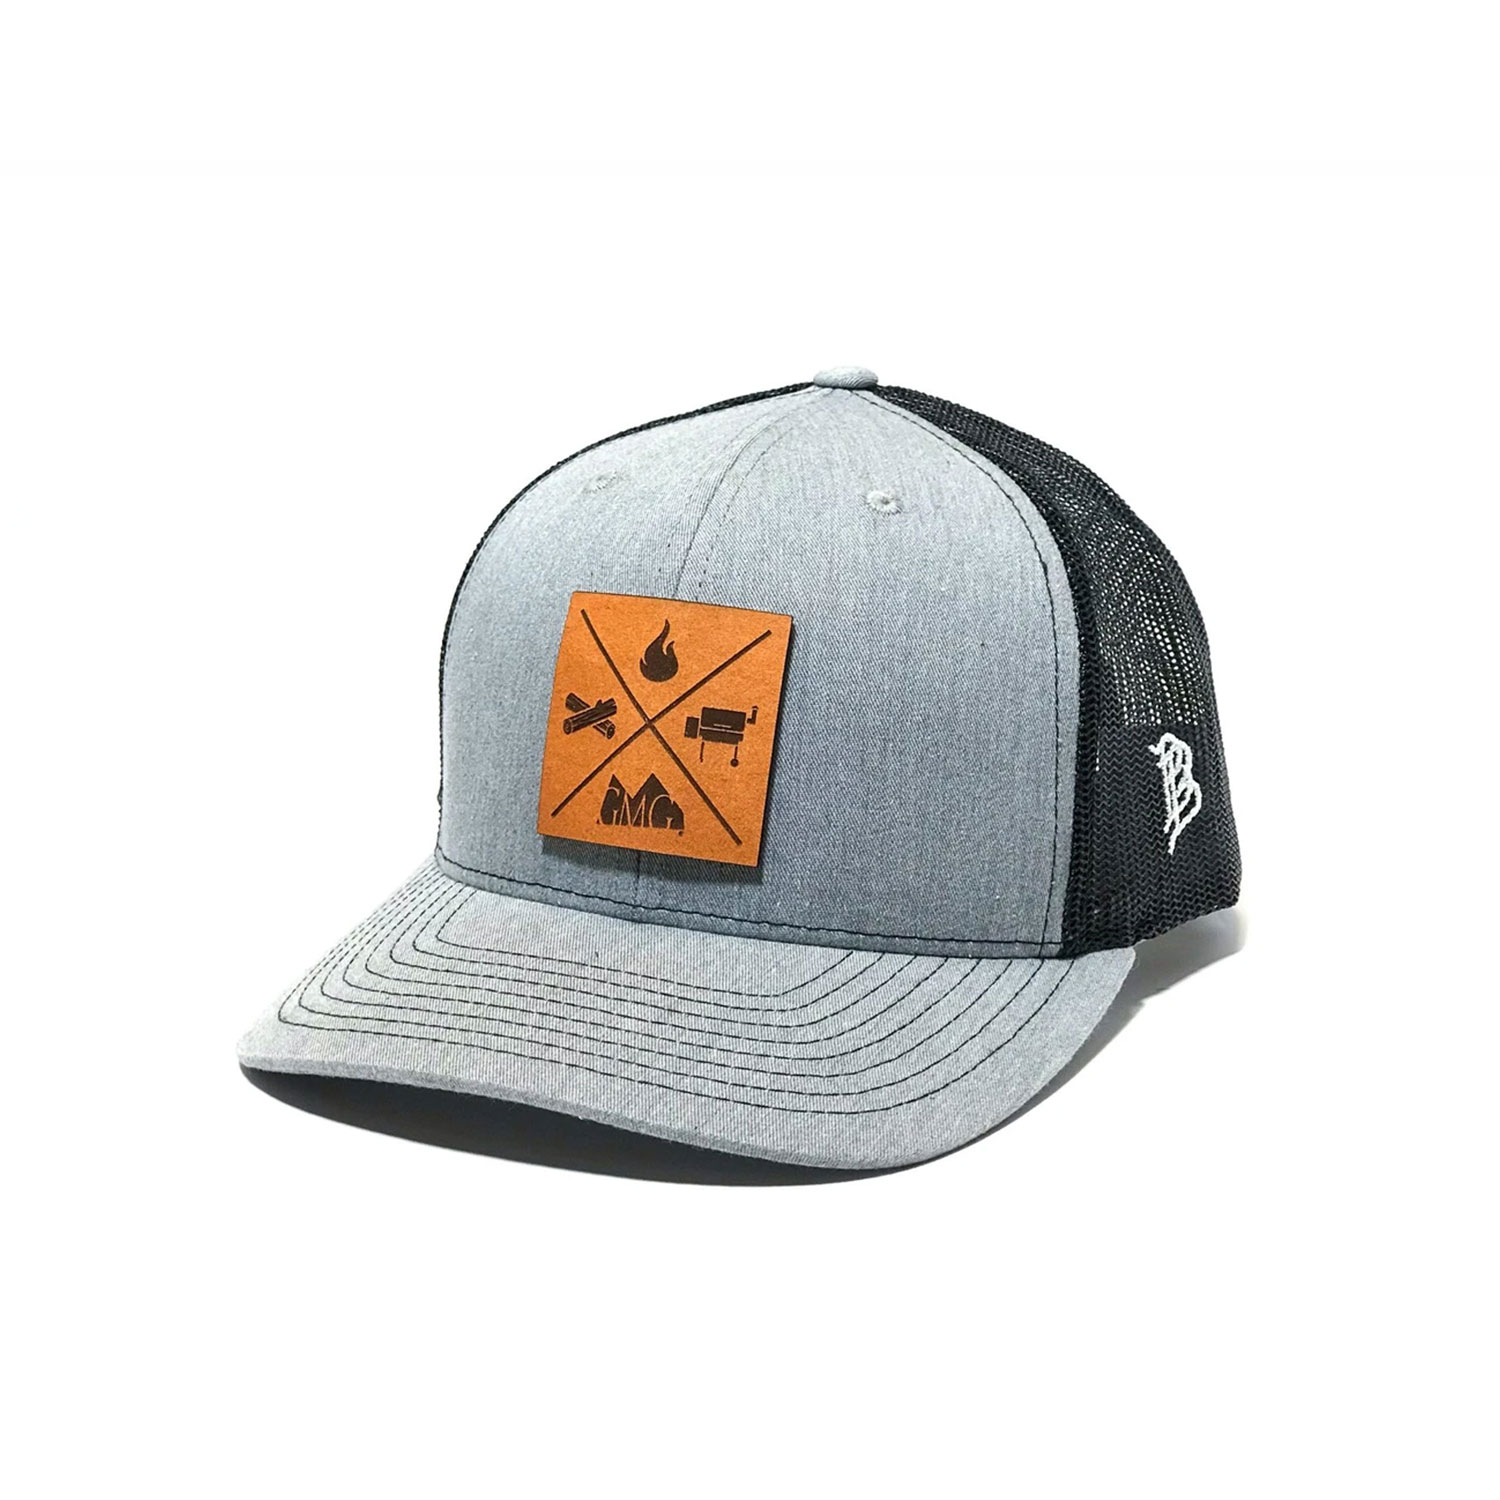 GMG LIGHT GREY TRUCKER HAT W/ LEATHER PATCH